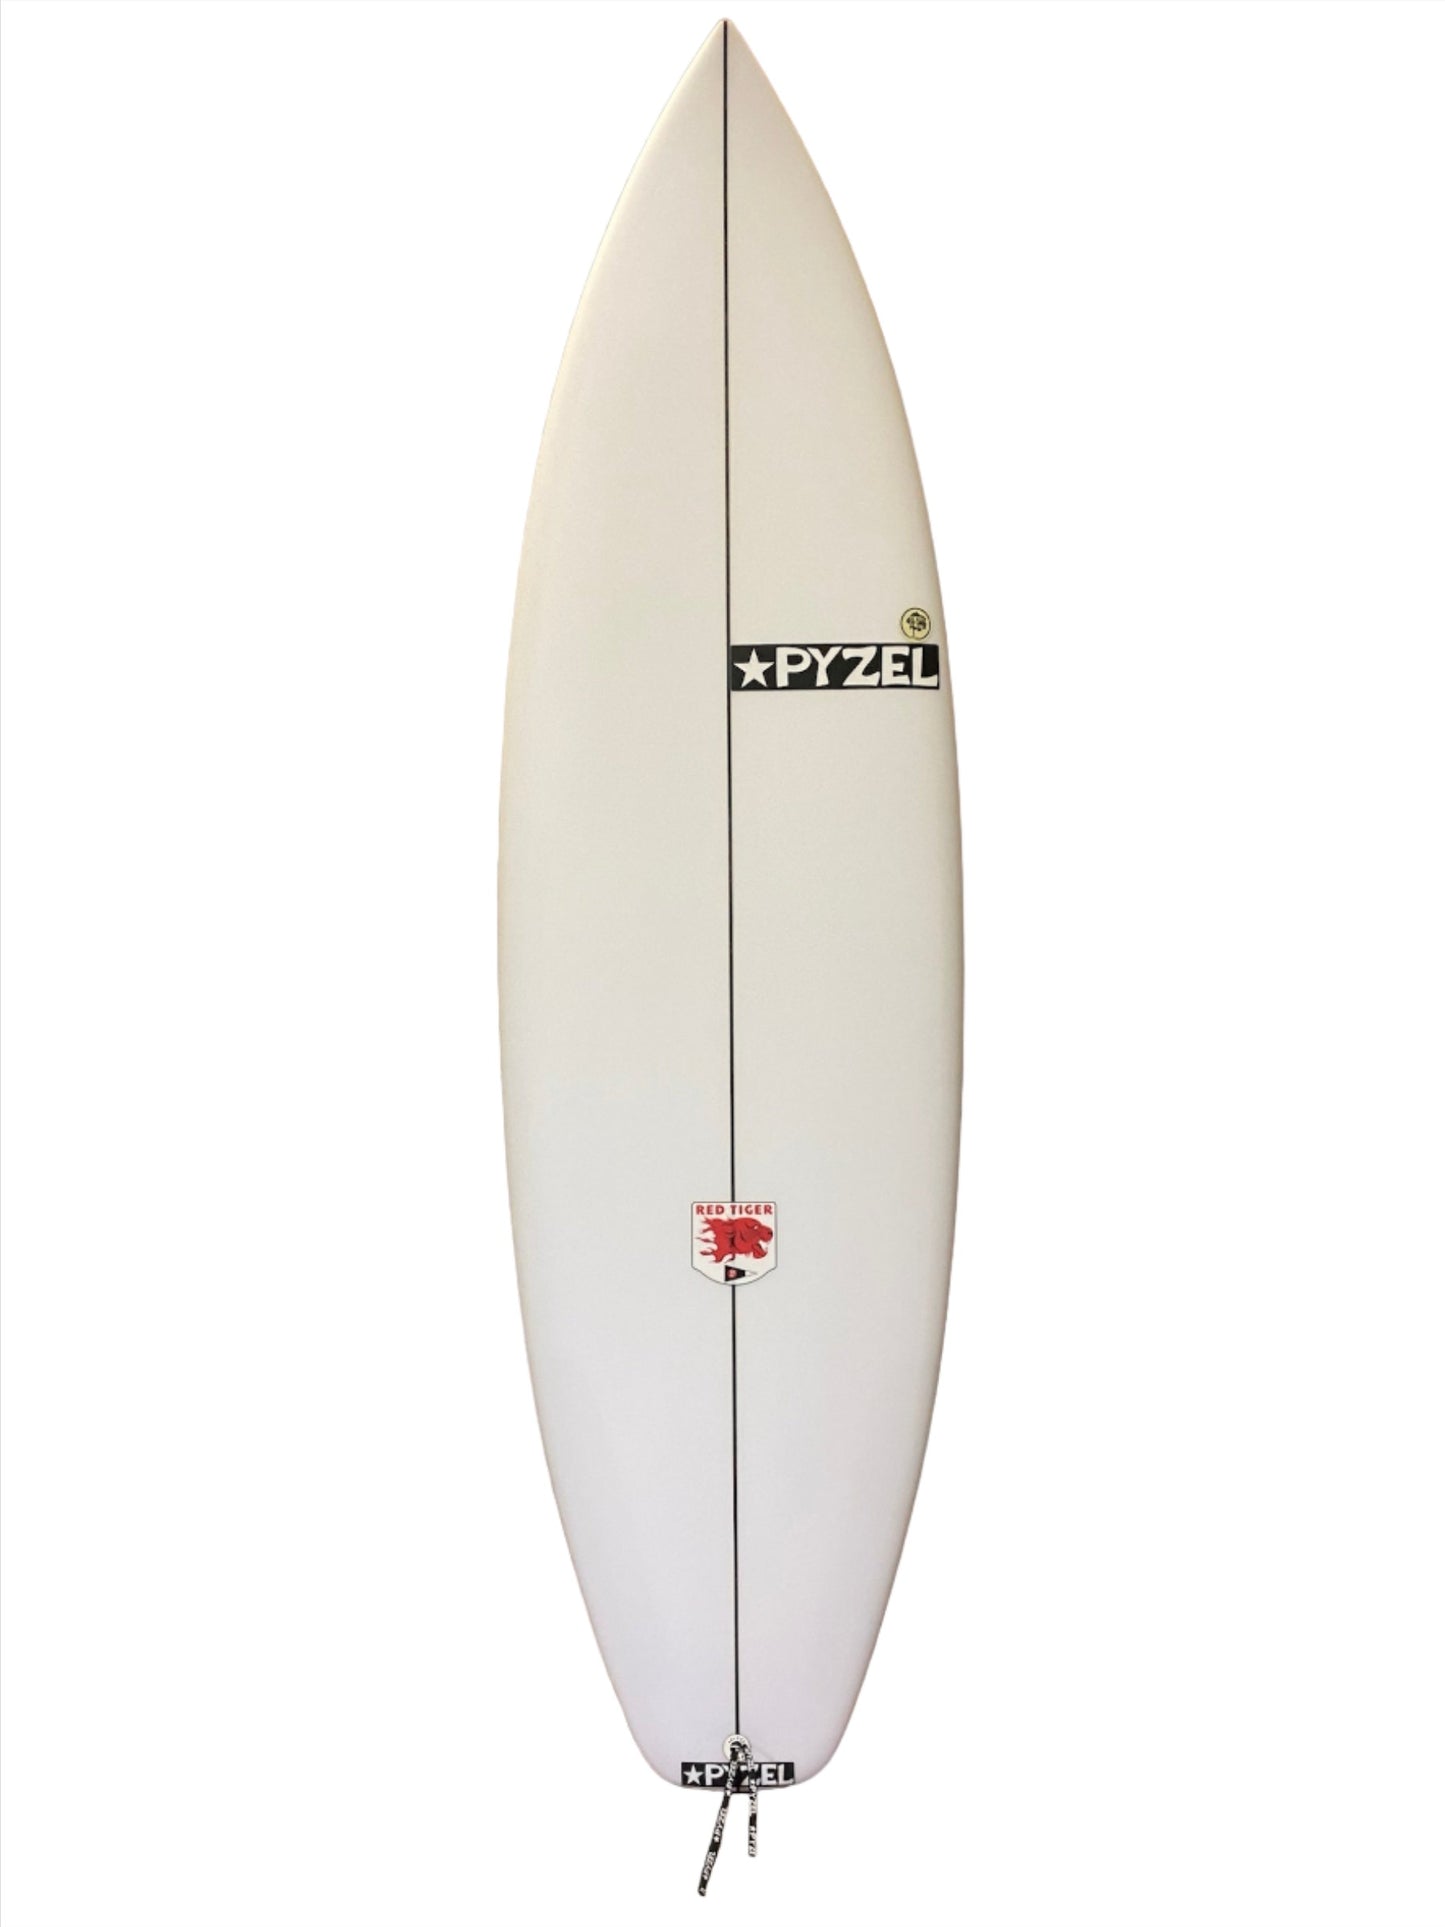 Pyzel Red Tiger XL 5'10" Surfboard